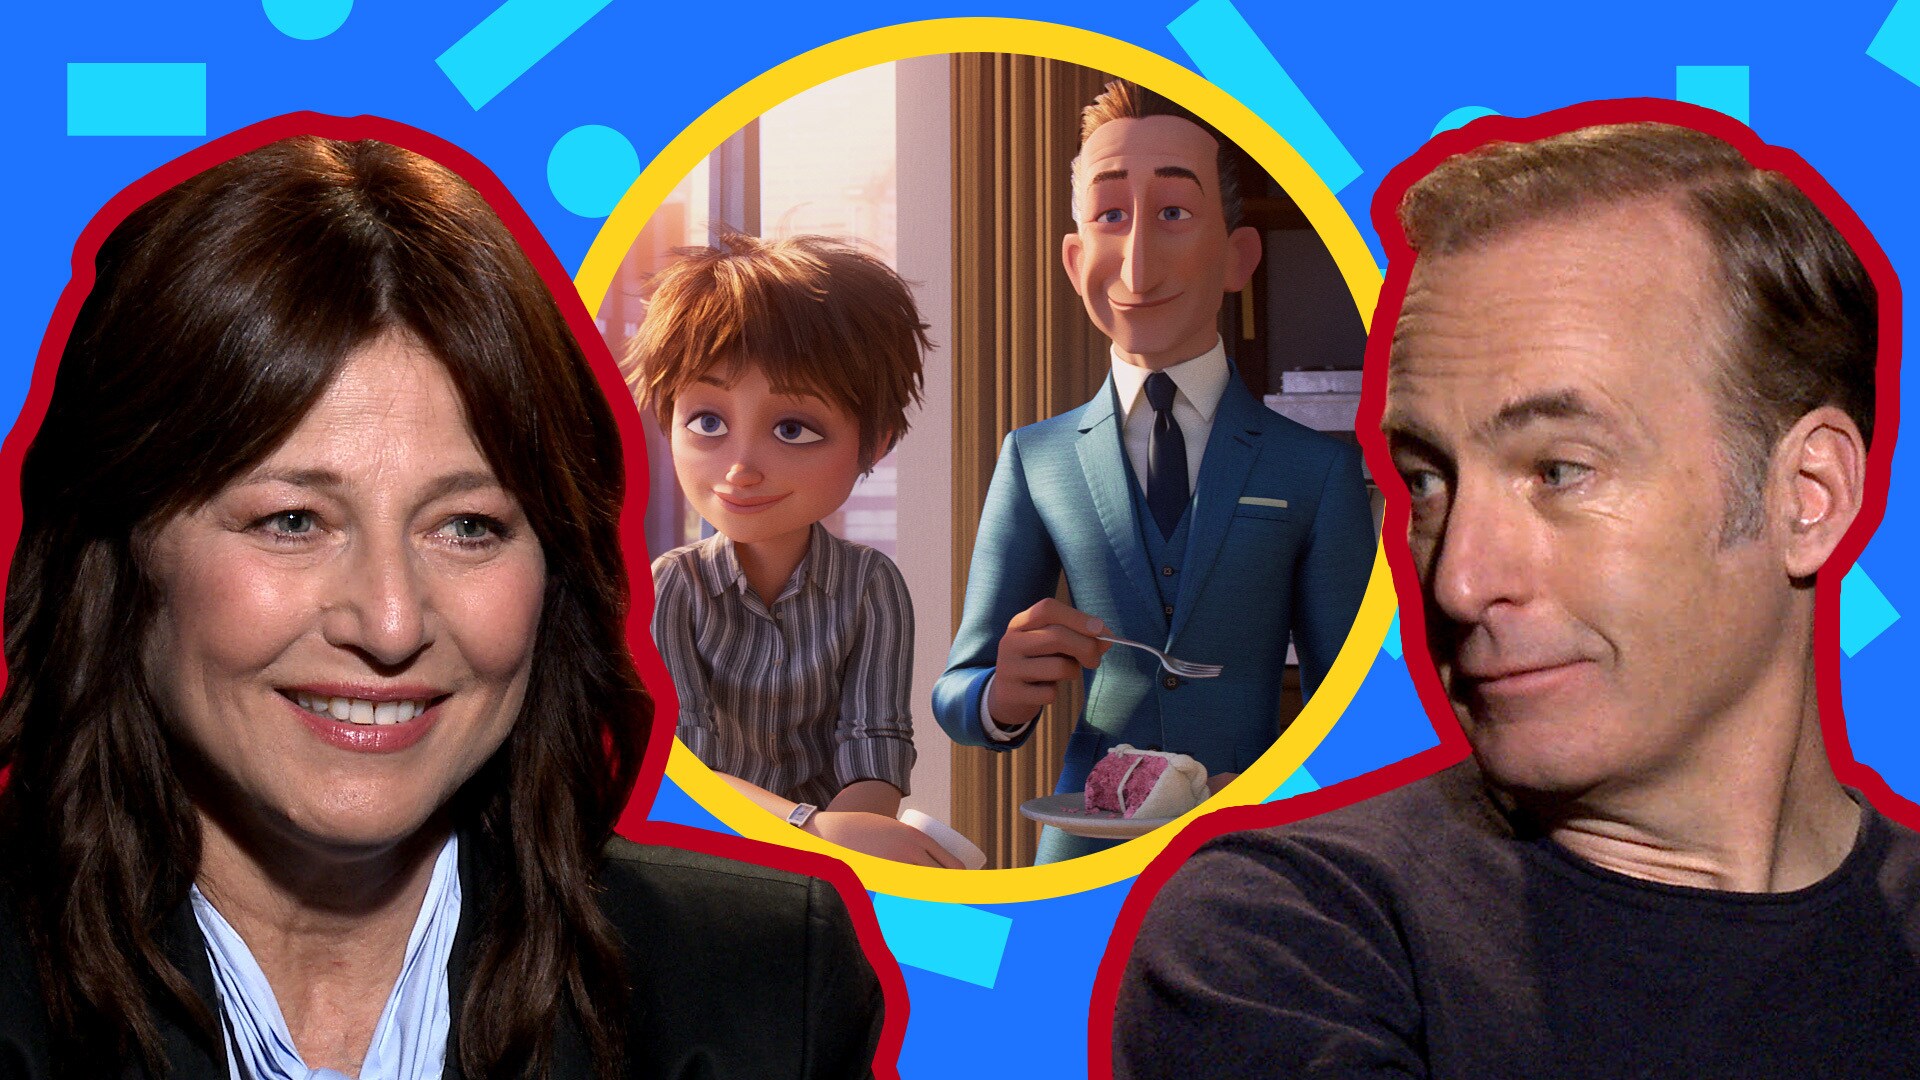 Bob Odenkirk and Catherine Keener on Playing Siblings in Incredibles 2 | Oh My Disney